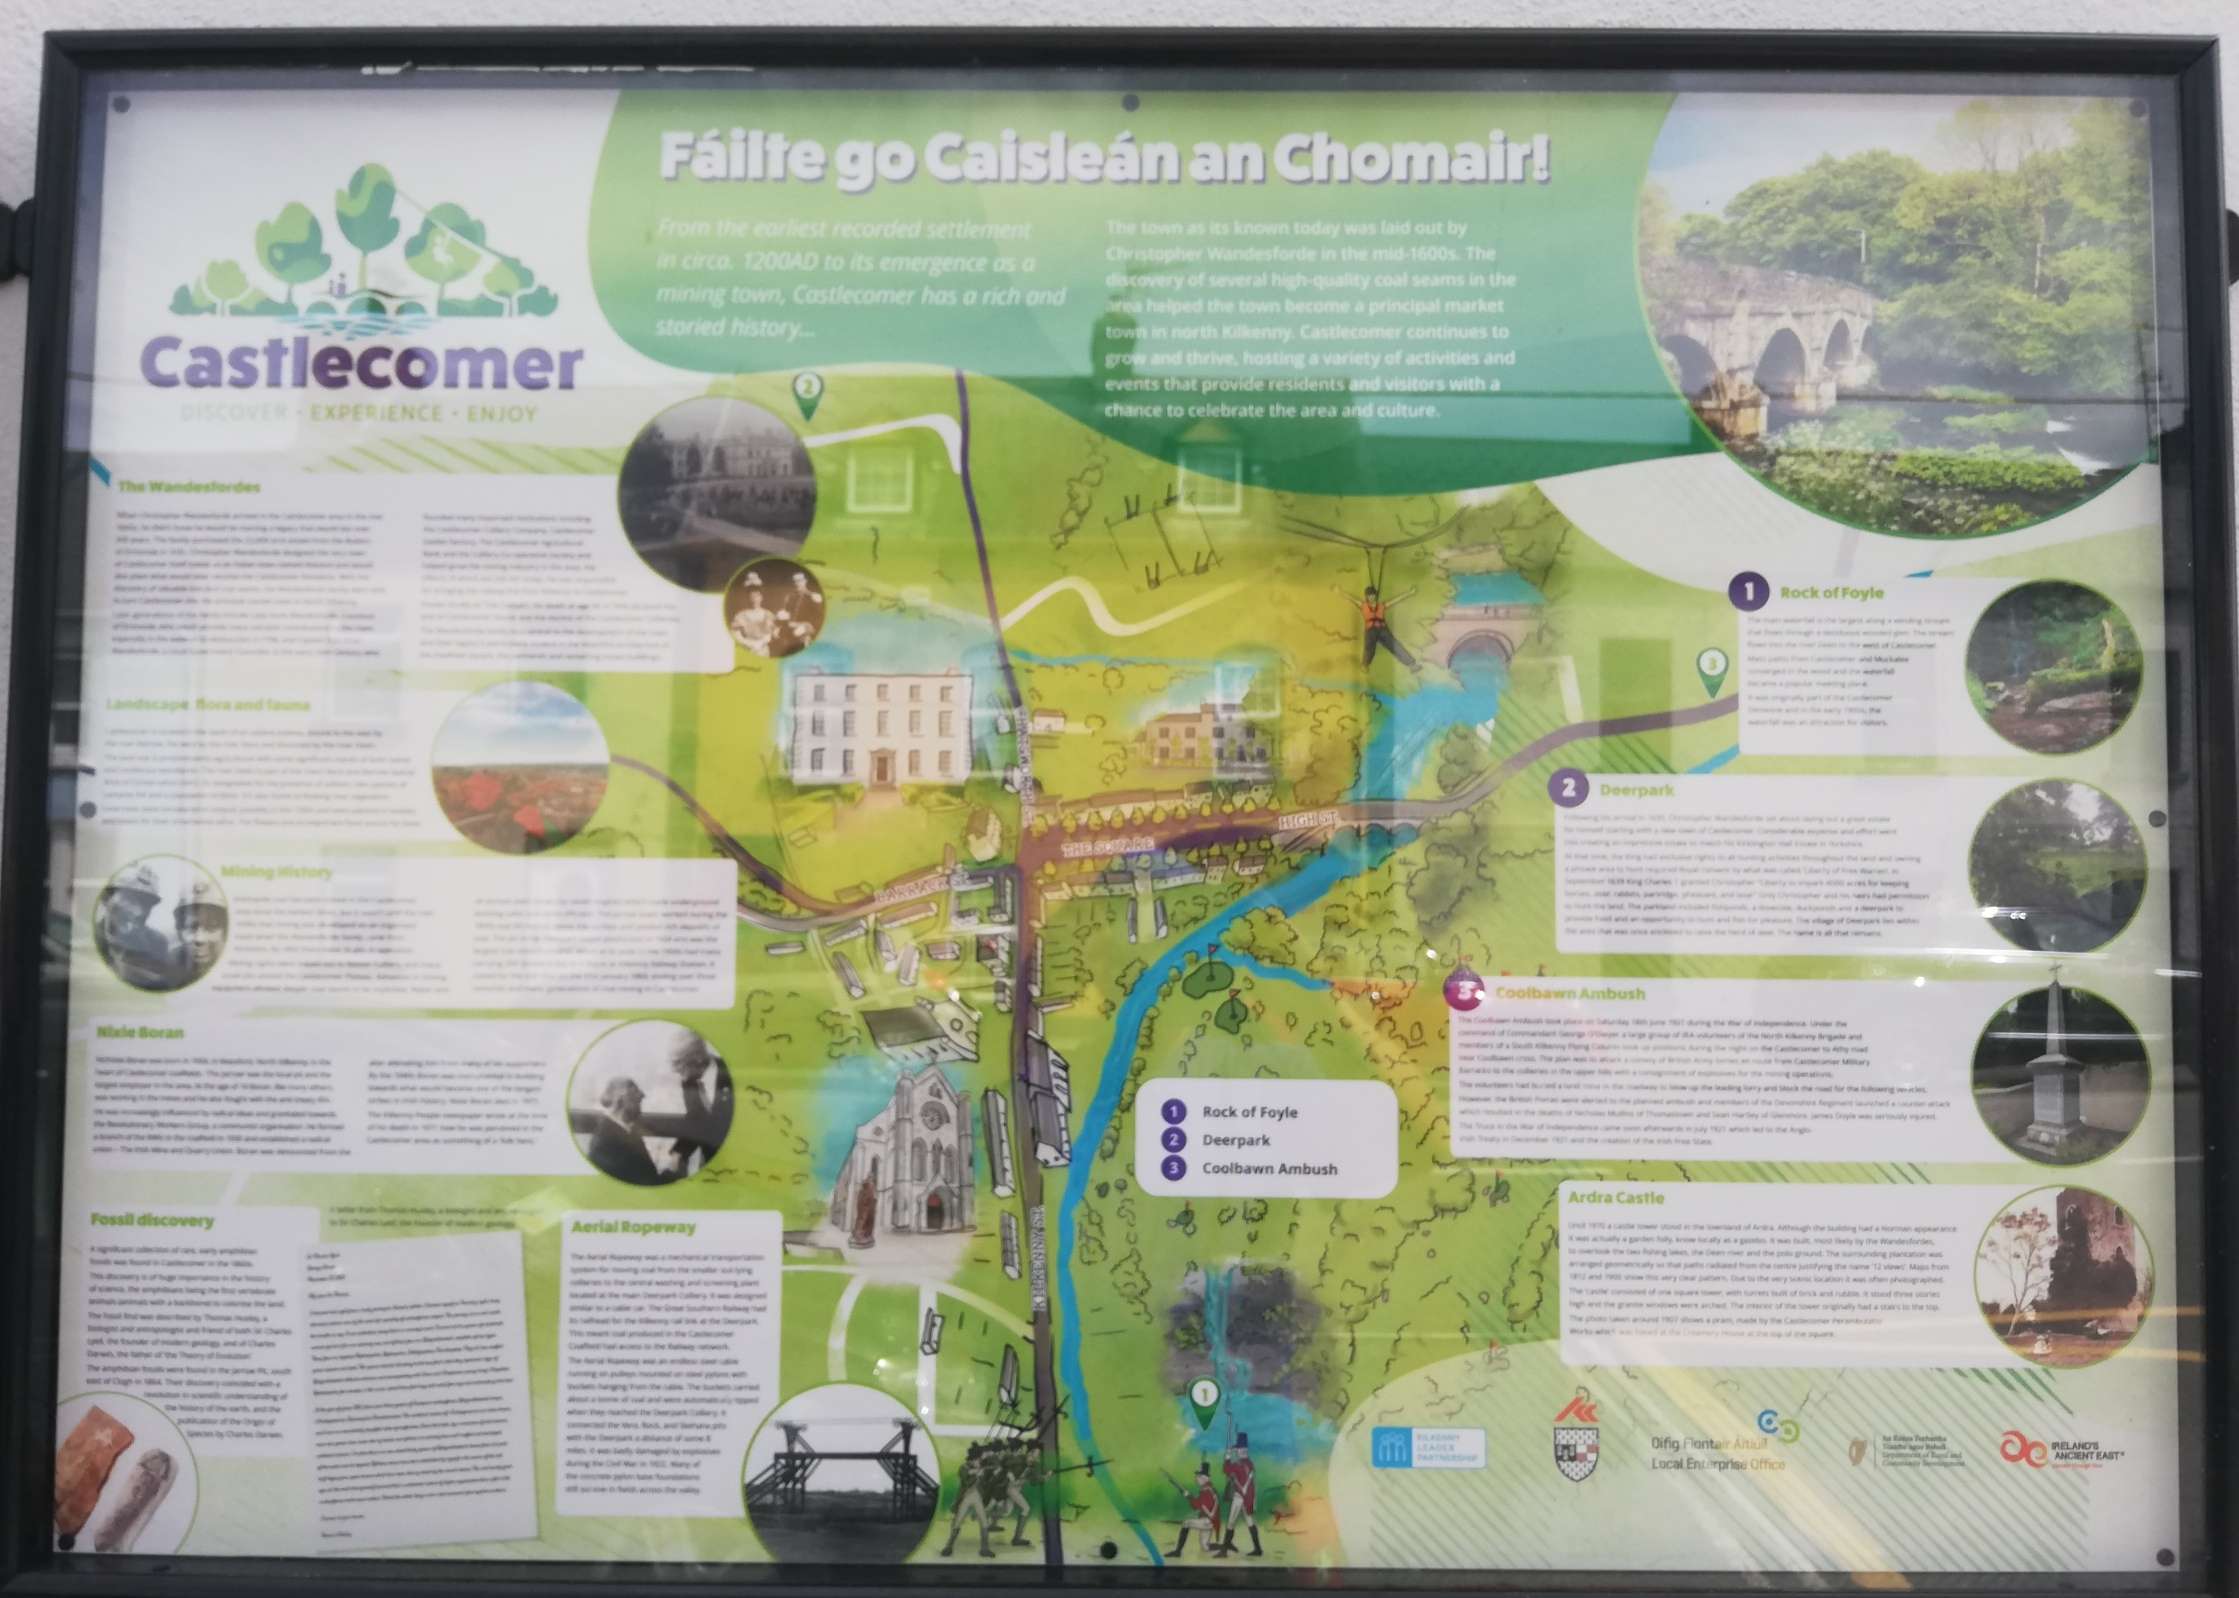 Tourist Information sign of things to do in Castlecomer